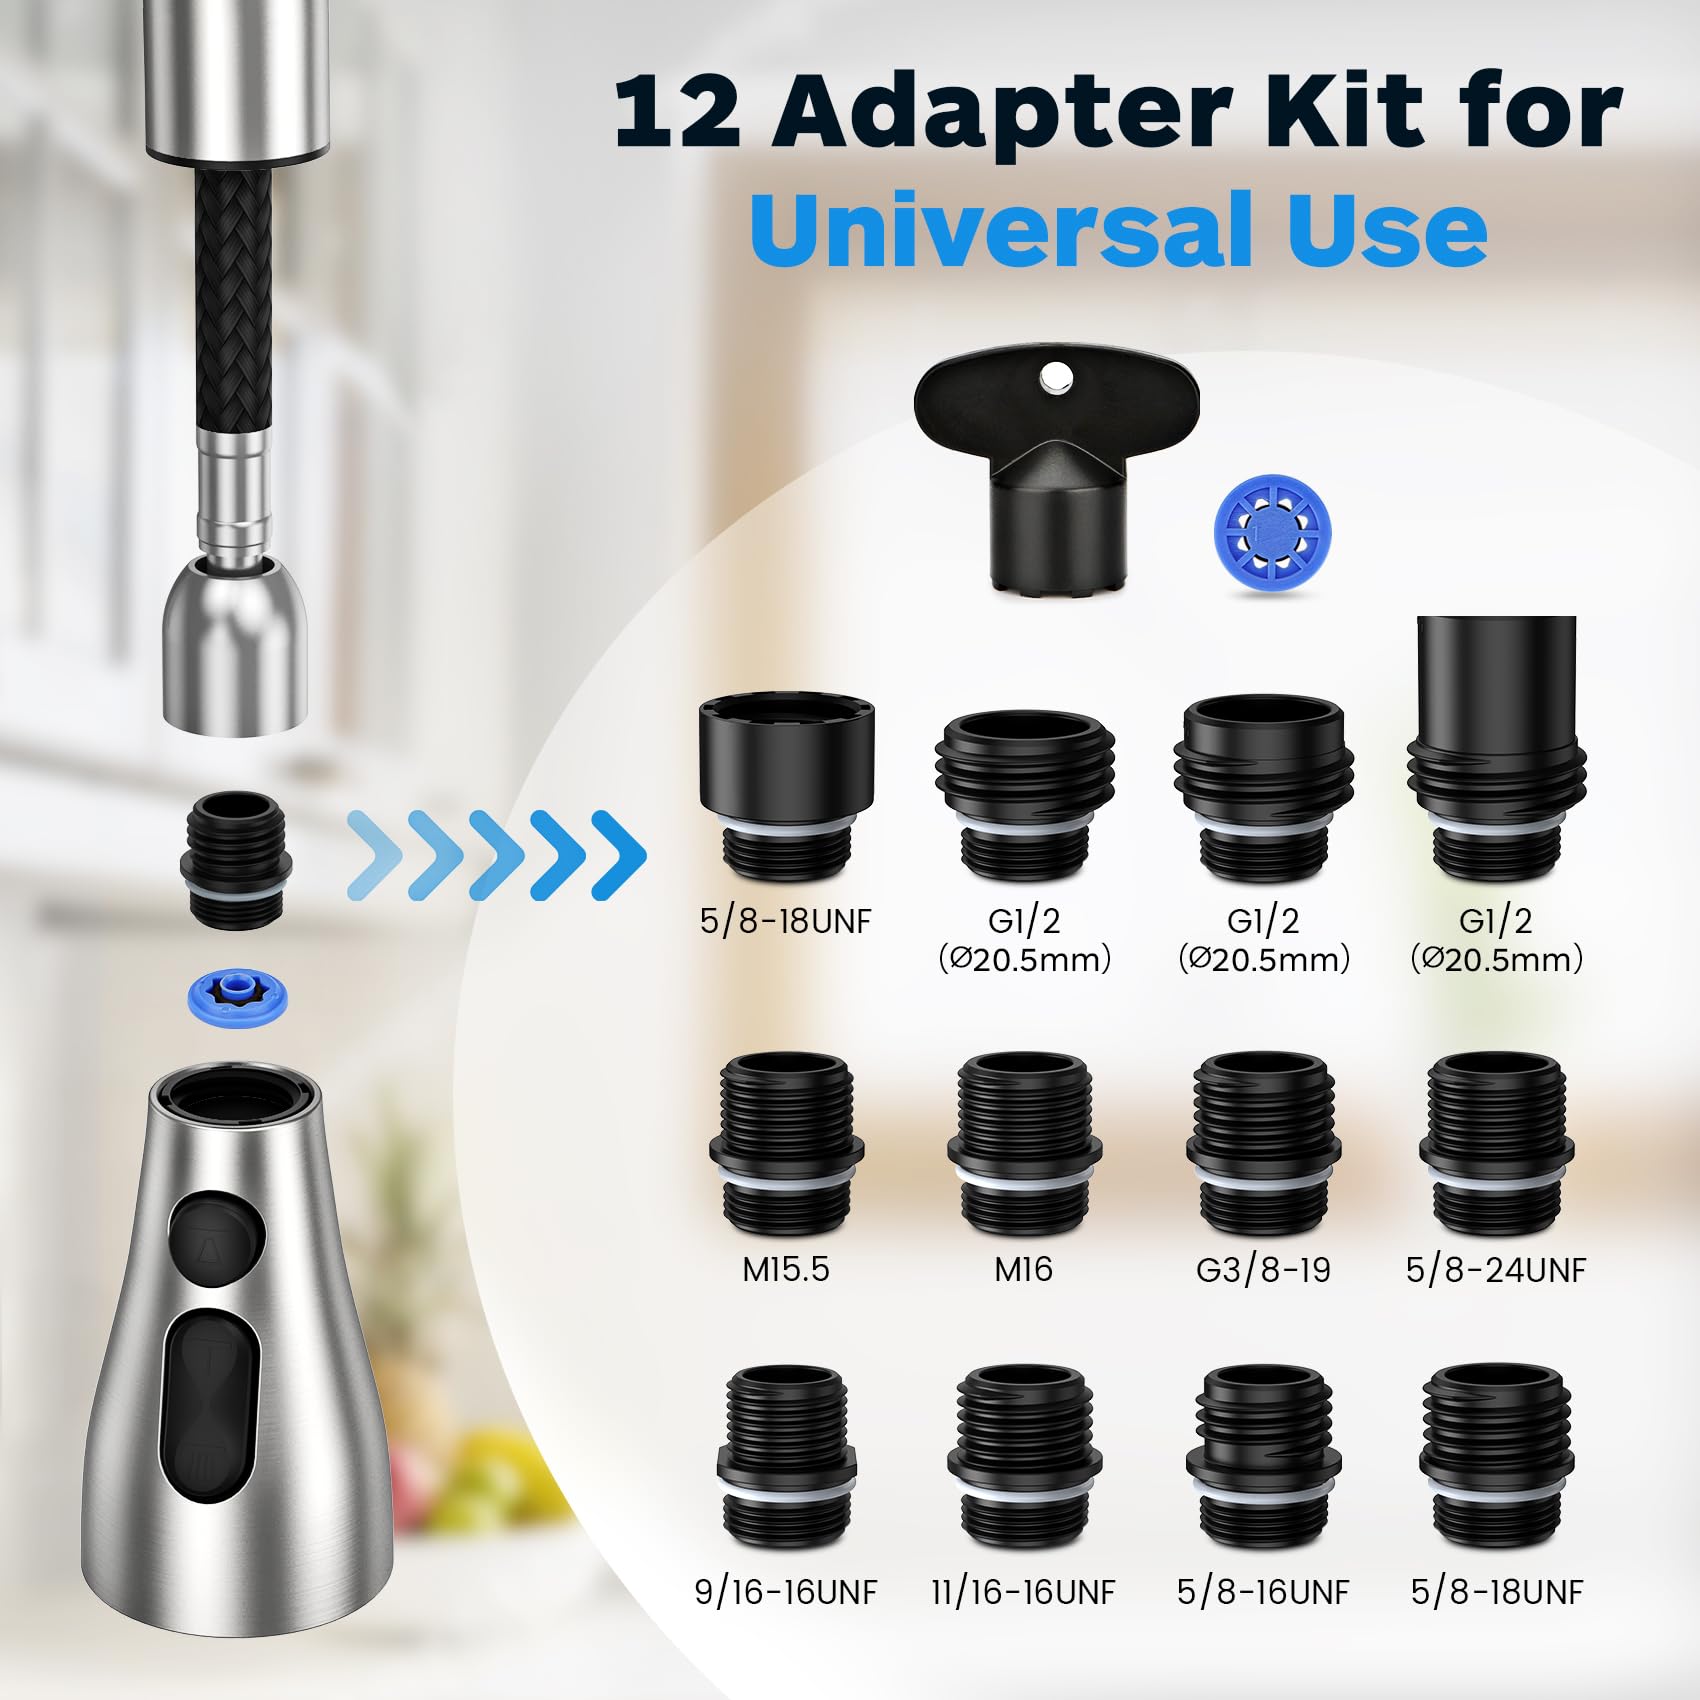 Kitchen Faucet Head Replacement 3 Modes with 12 Adapters, Pull Down Spray Head for Kitchen Faucet, Kitchen Sink Faucet Head G 1/2, Sprayer Head Replacement, Compatible with Moen，Delta, Kohler Faucets